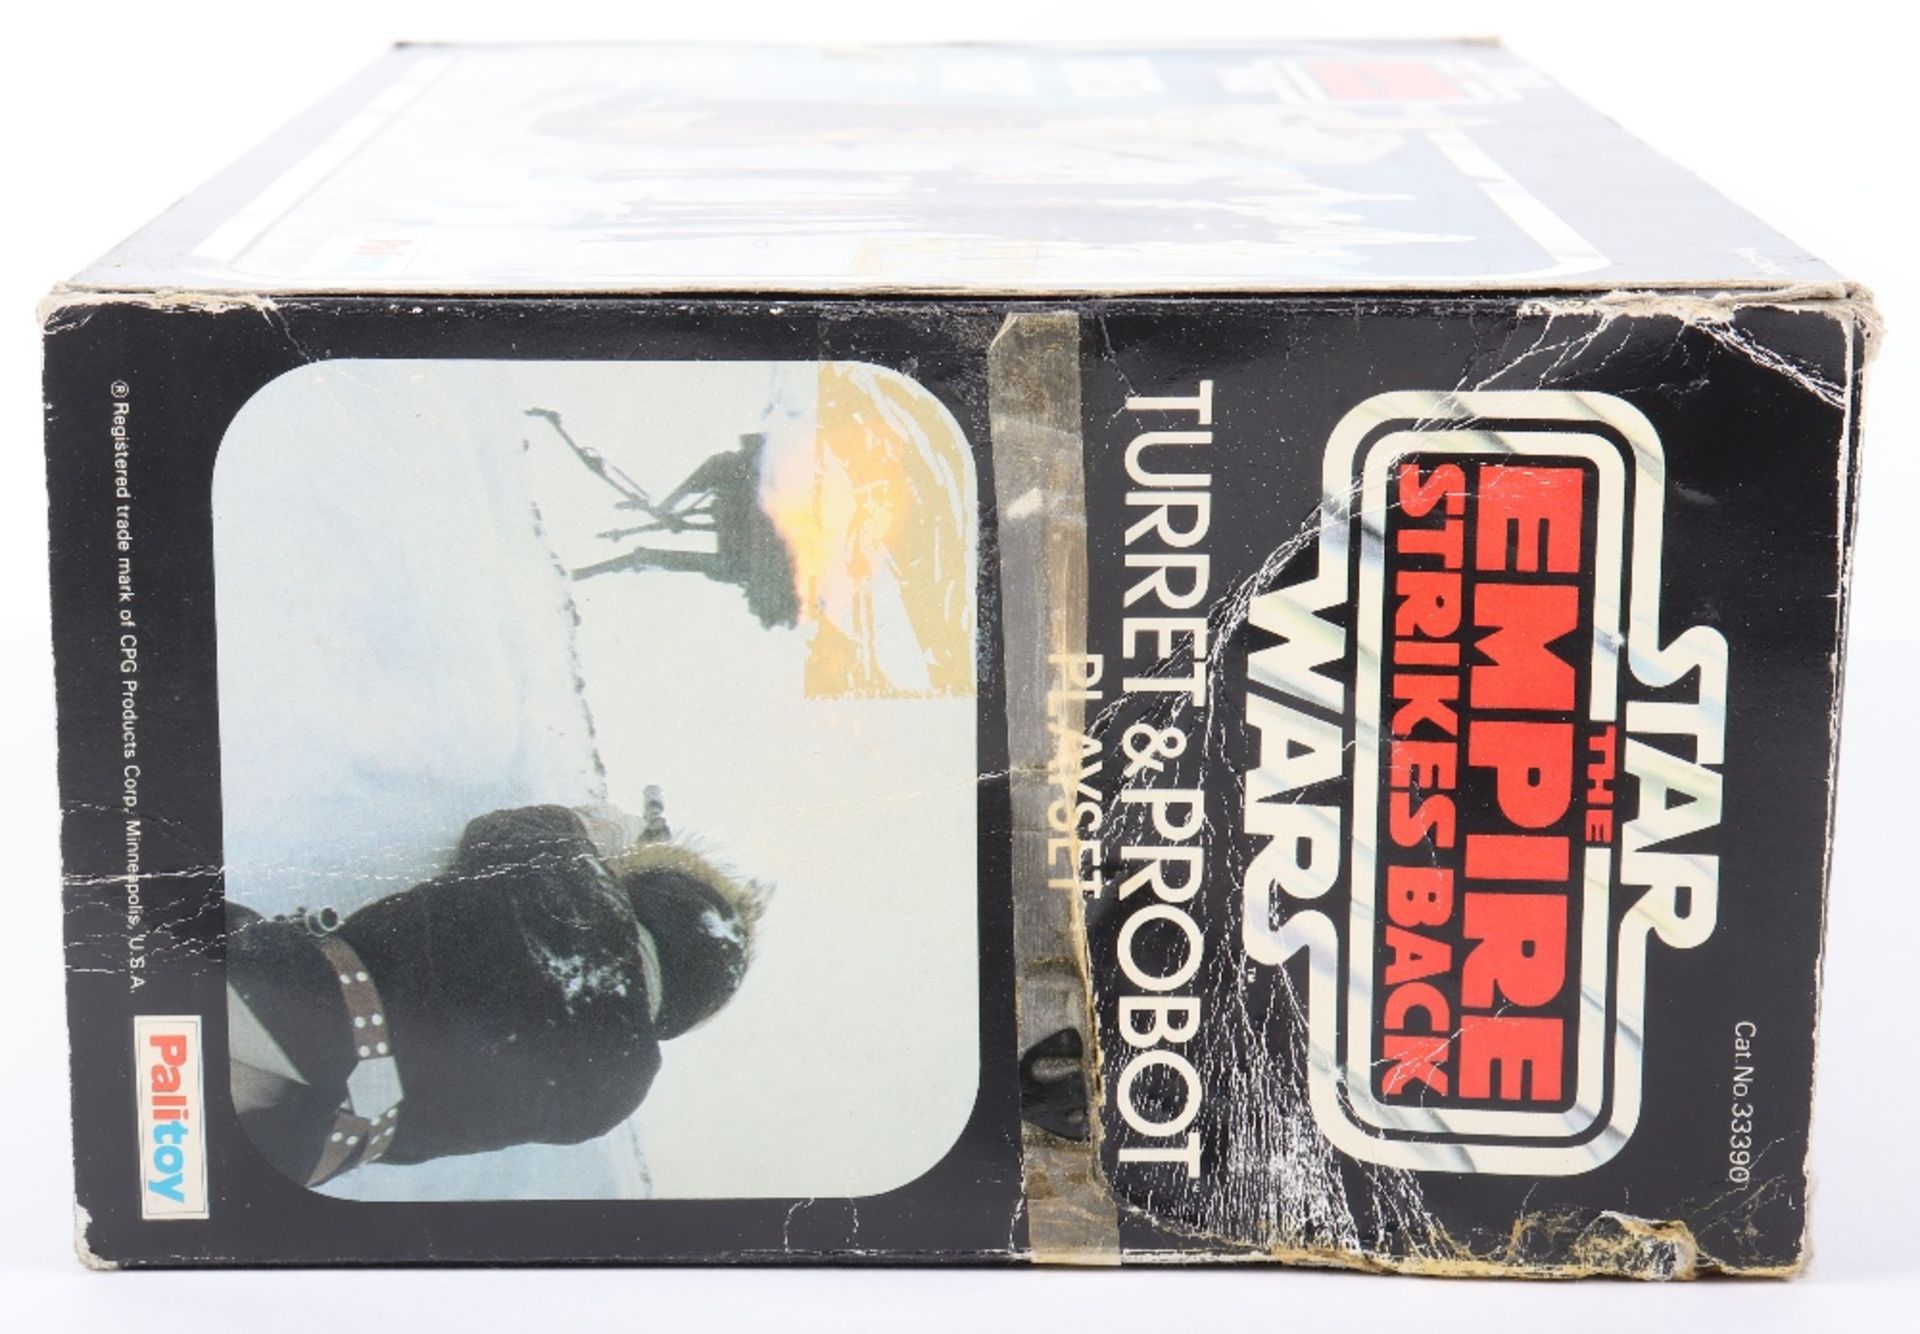 Boxed Palitoy Star Wars The Empire Strikes Back Turret & Probot Rebel Base Playset - Image 8 of 8